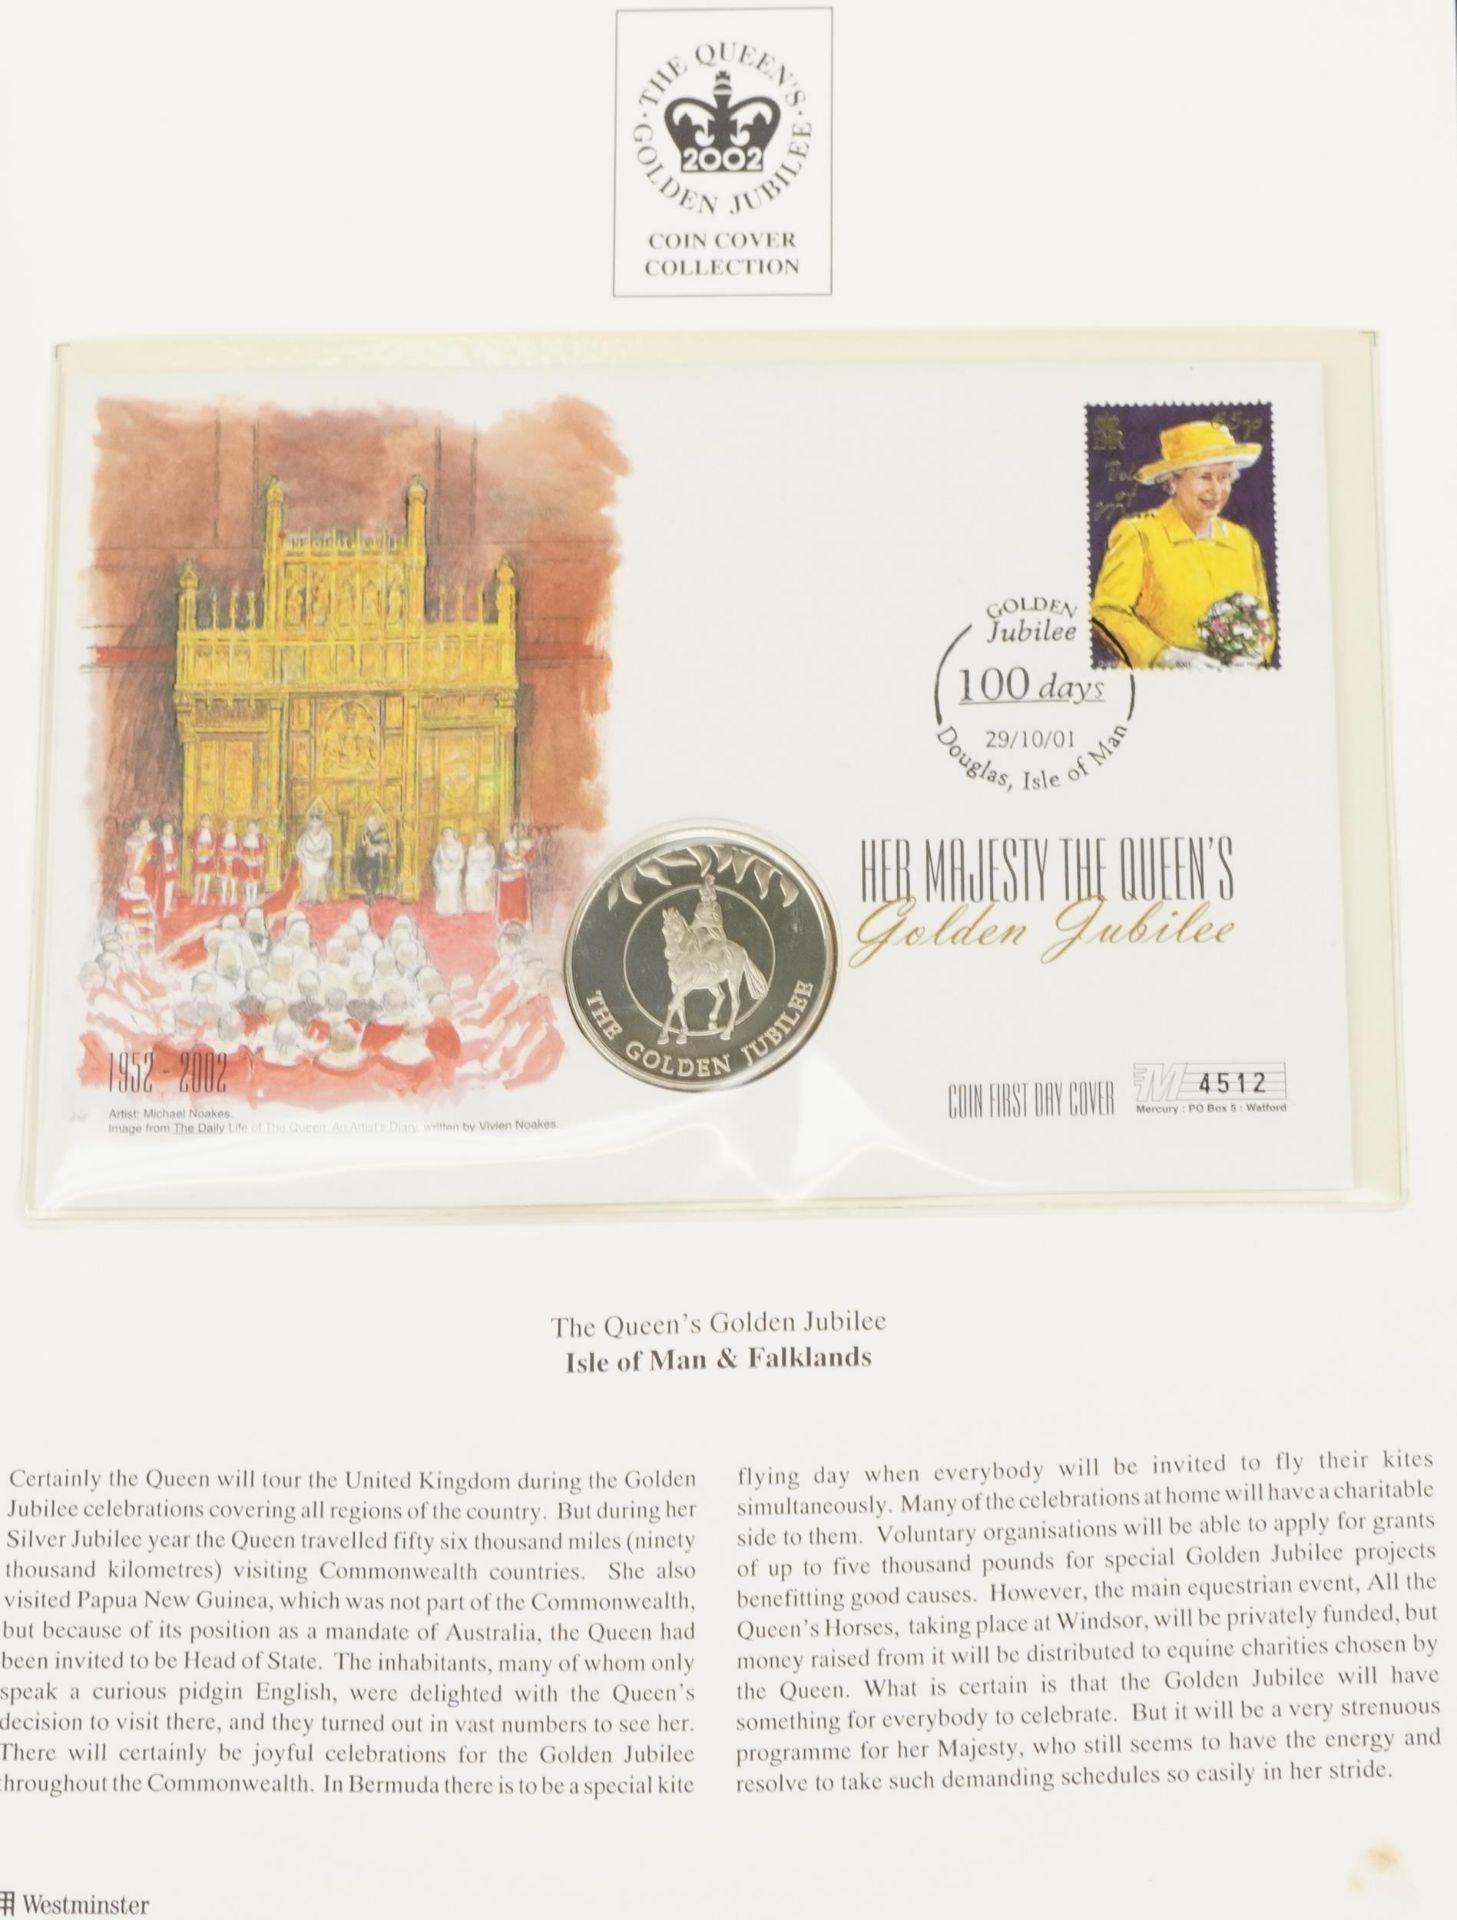 The Queen's Golden Jubilee coin covers arranged in two albums including Isle of Man & Falklands - Image 5 of 11